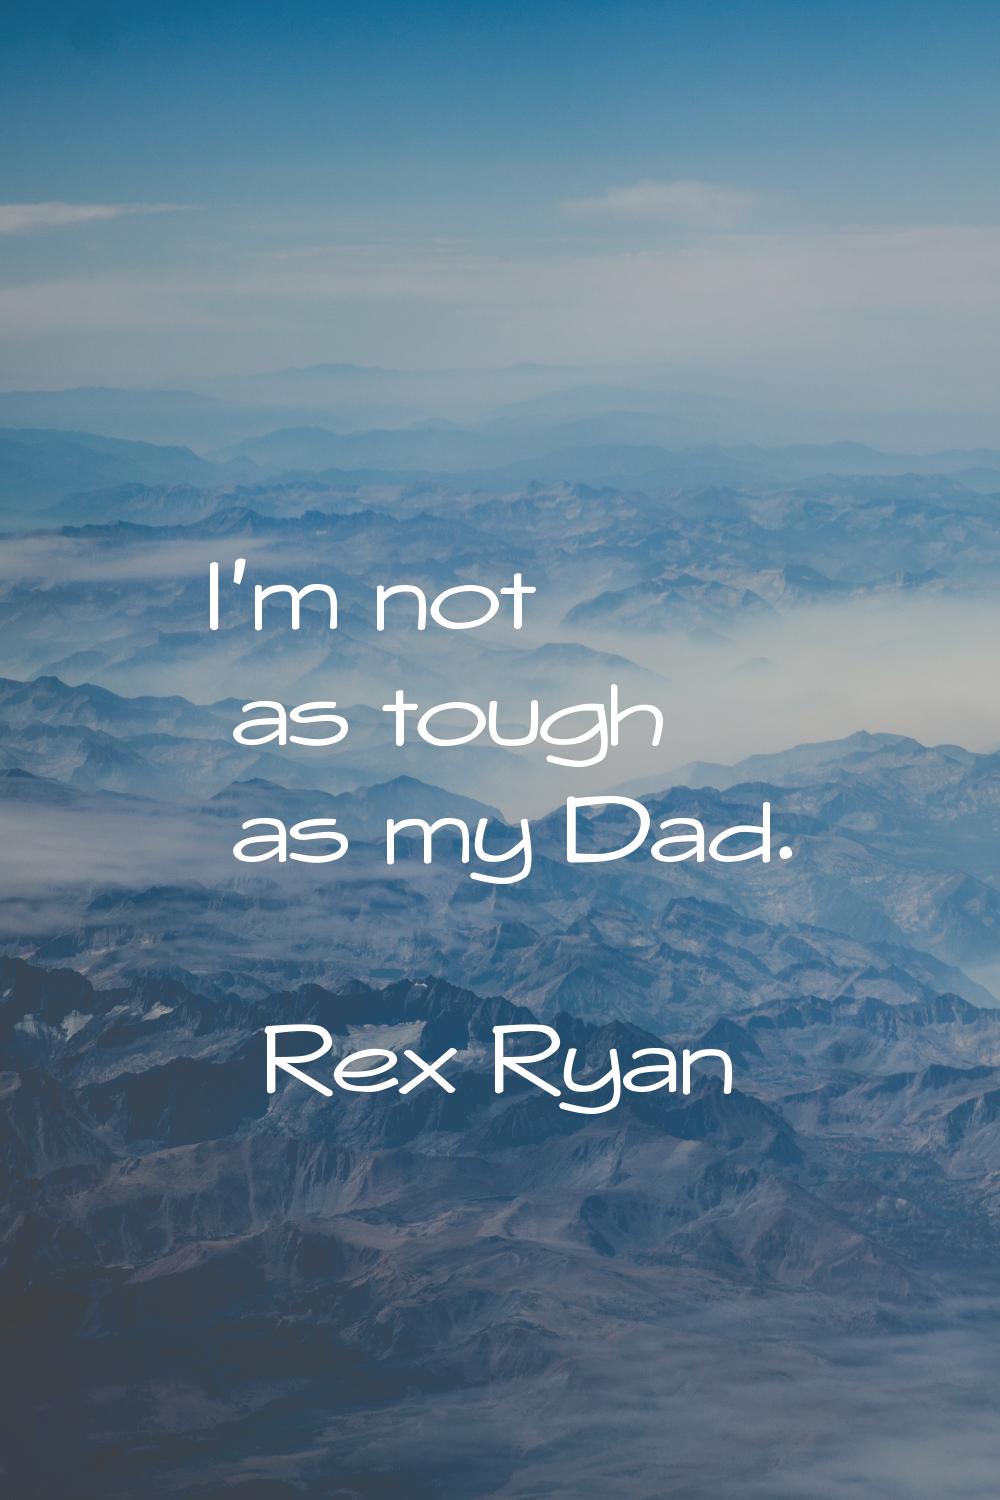 I'm not as tough as my Dad.